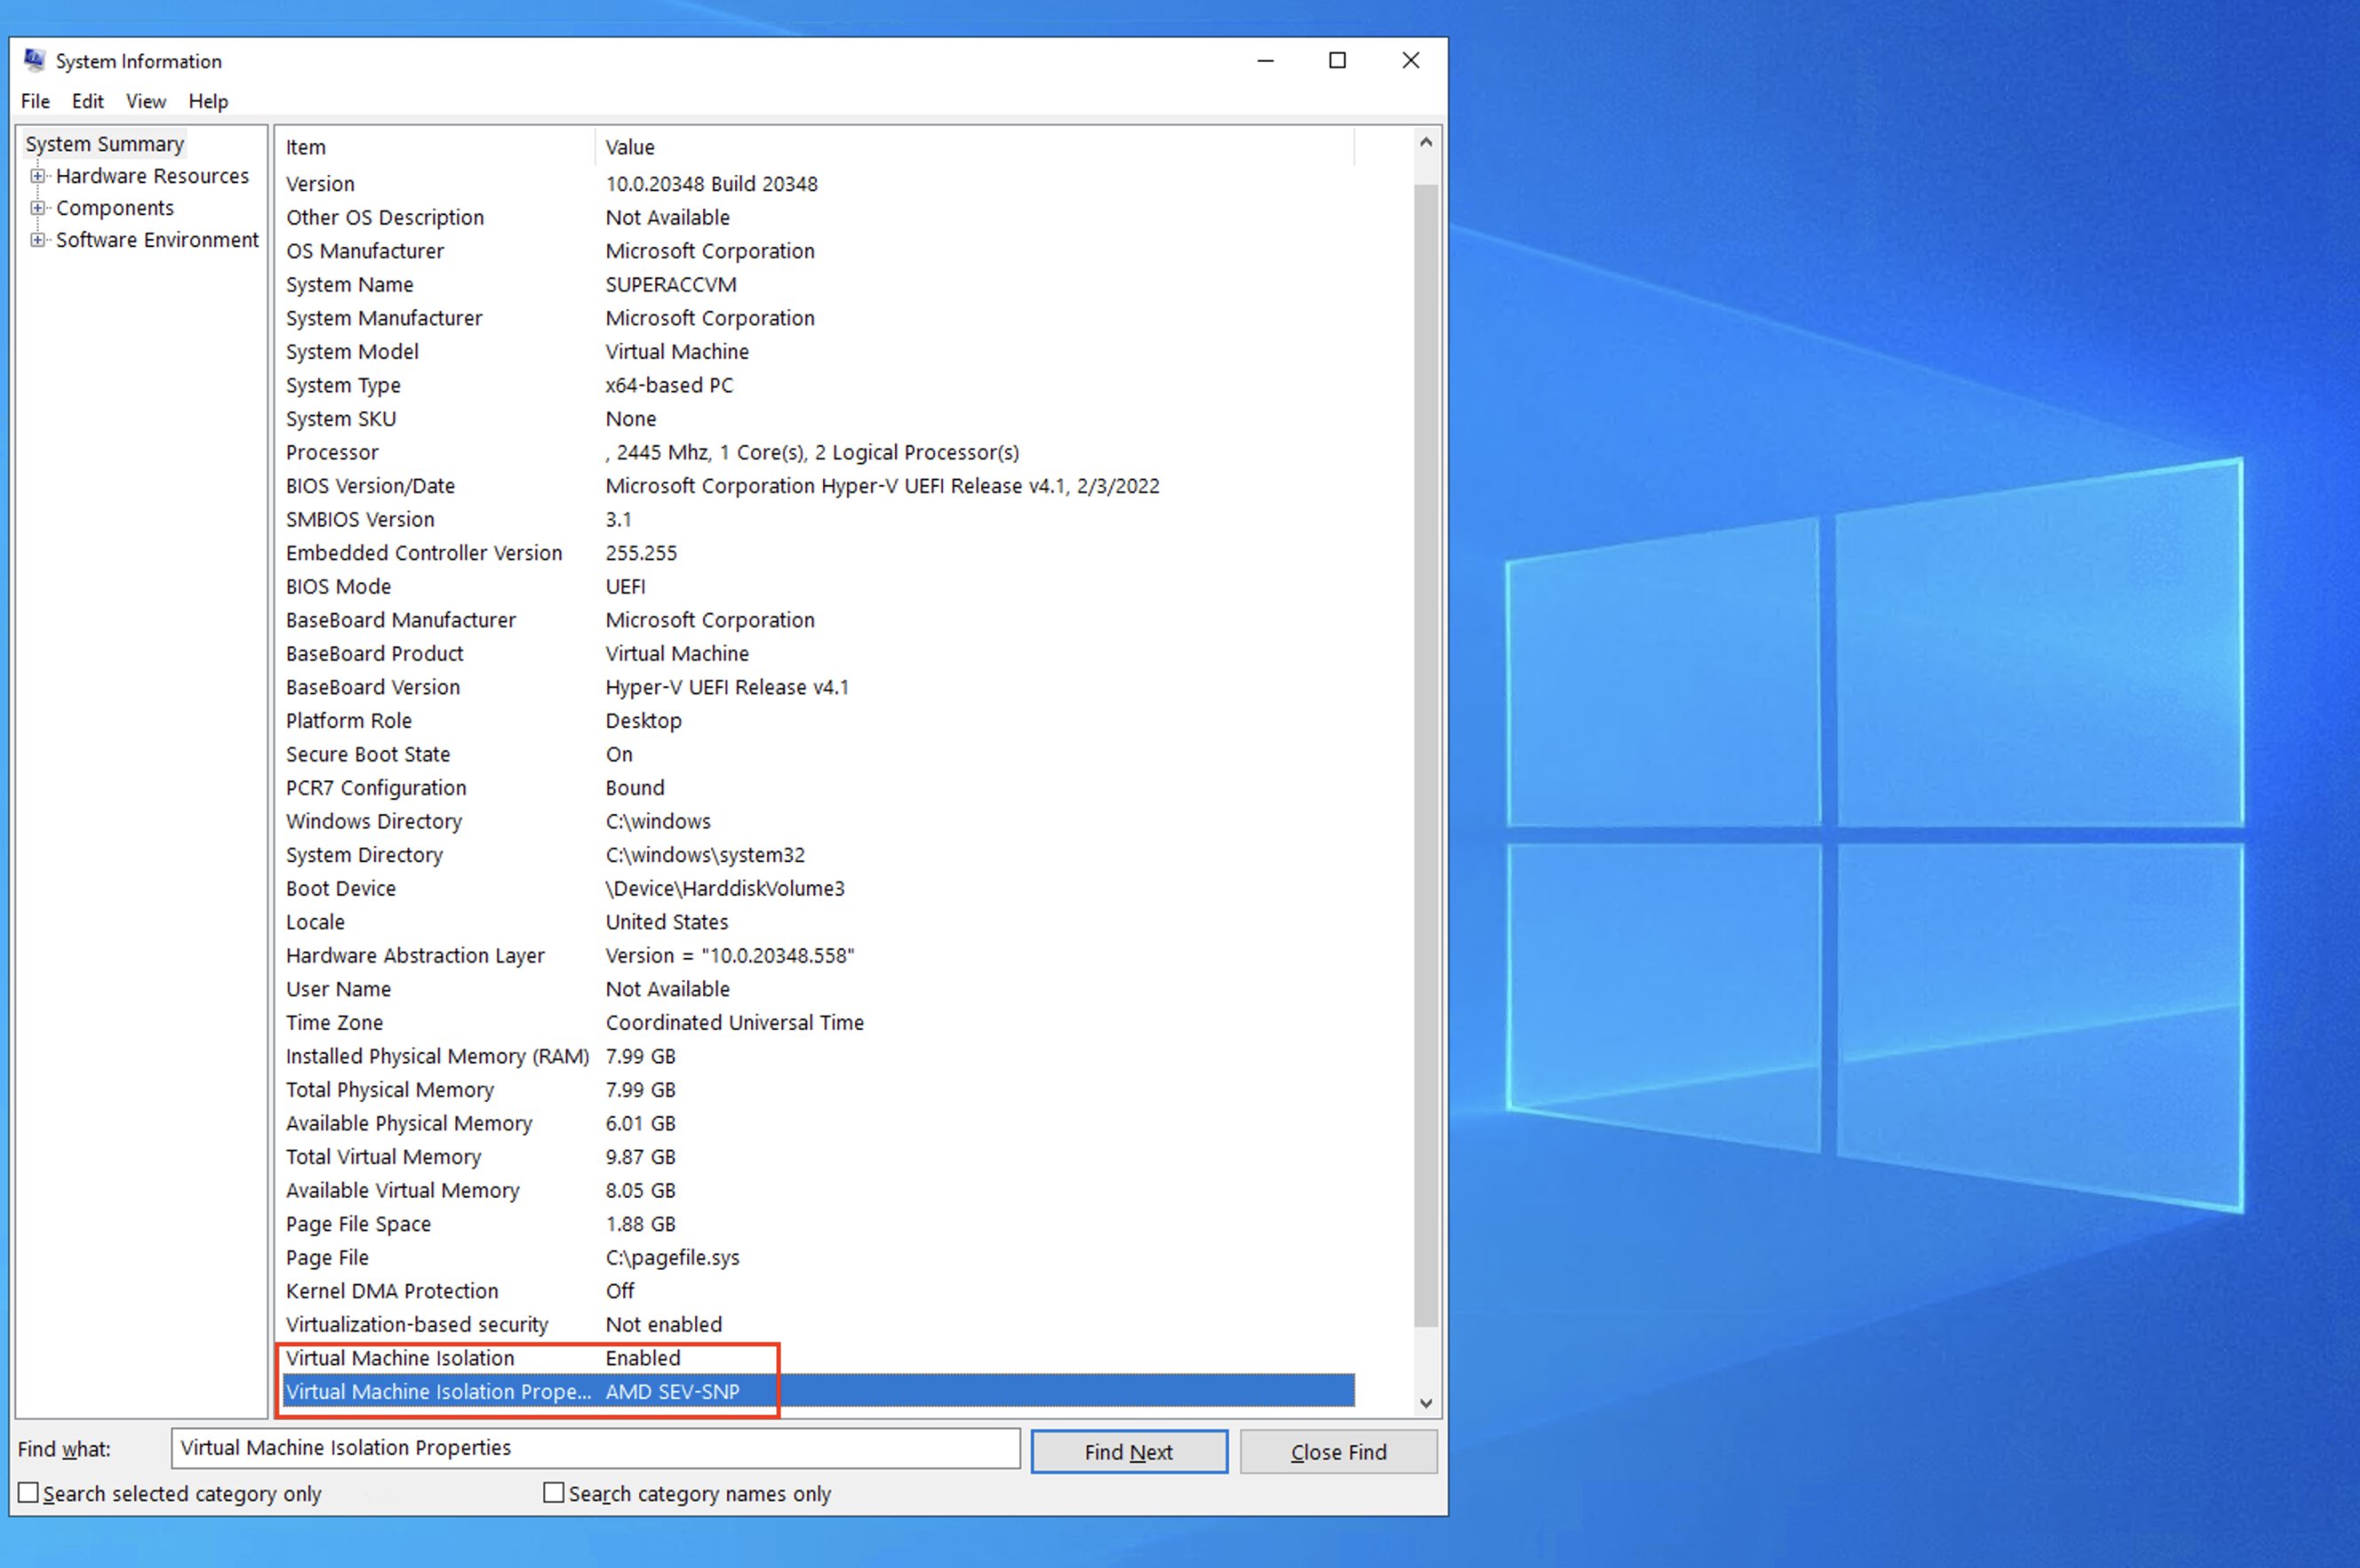 A screenshot of ‘msinfo32’, a.k.a. system information. The “Virtual Machine Isolation properties” key has a value set to ‘AMD SEV-SNP’. Virtual machine isolation is set to ’enabled’.